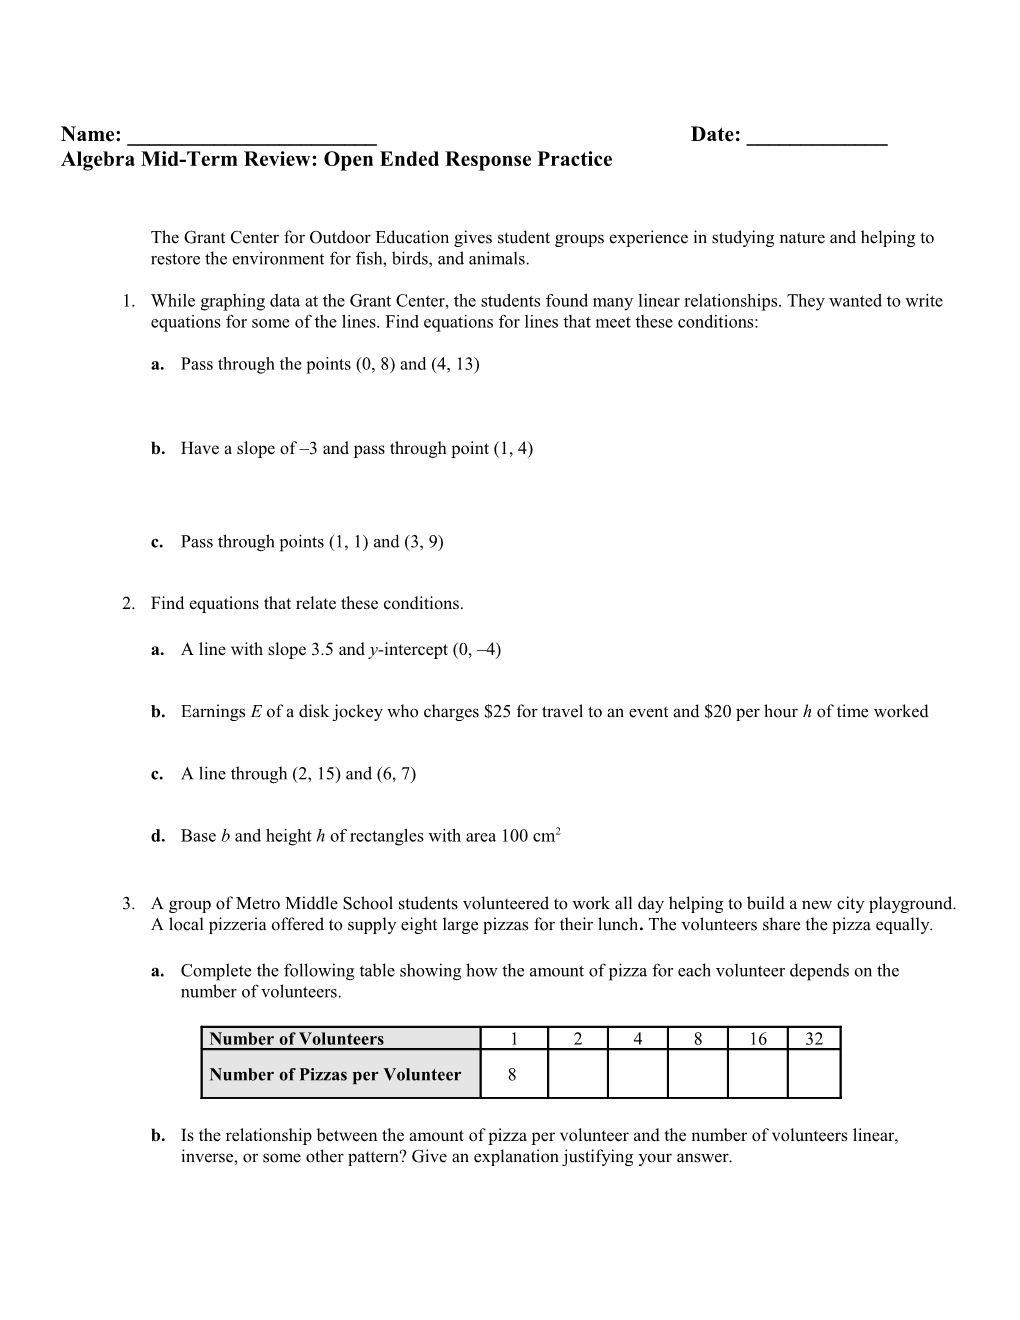 Algebra Mid-Term Review: Open Ended Response Practice